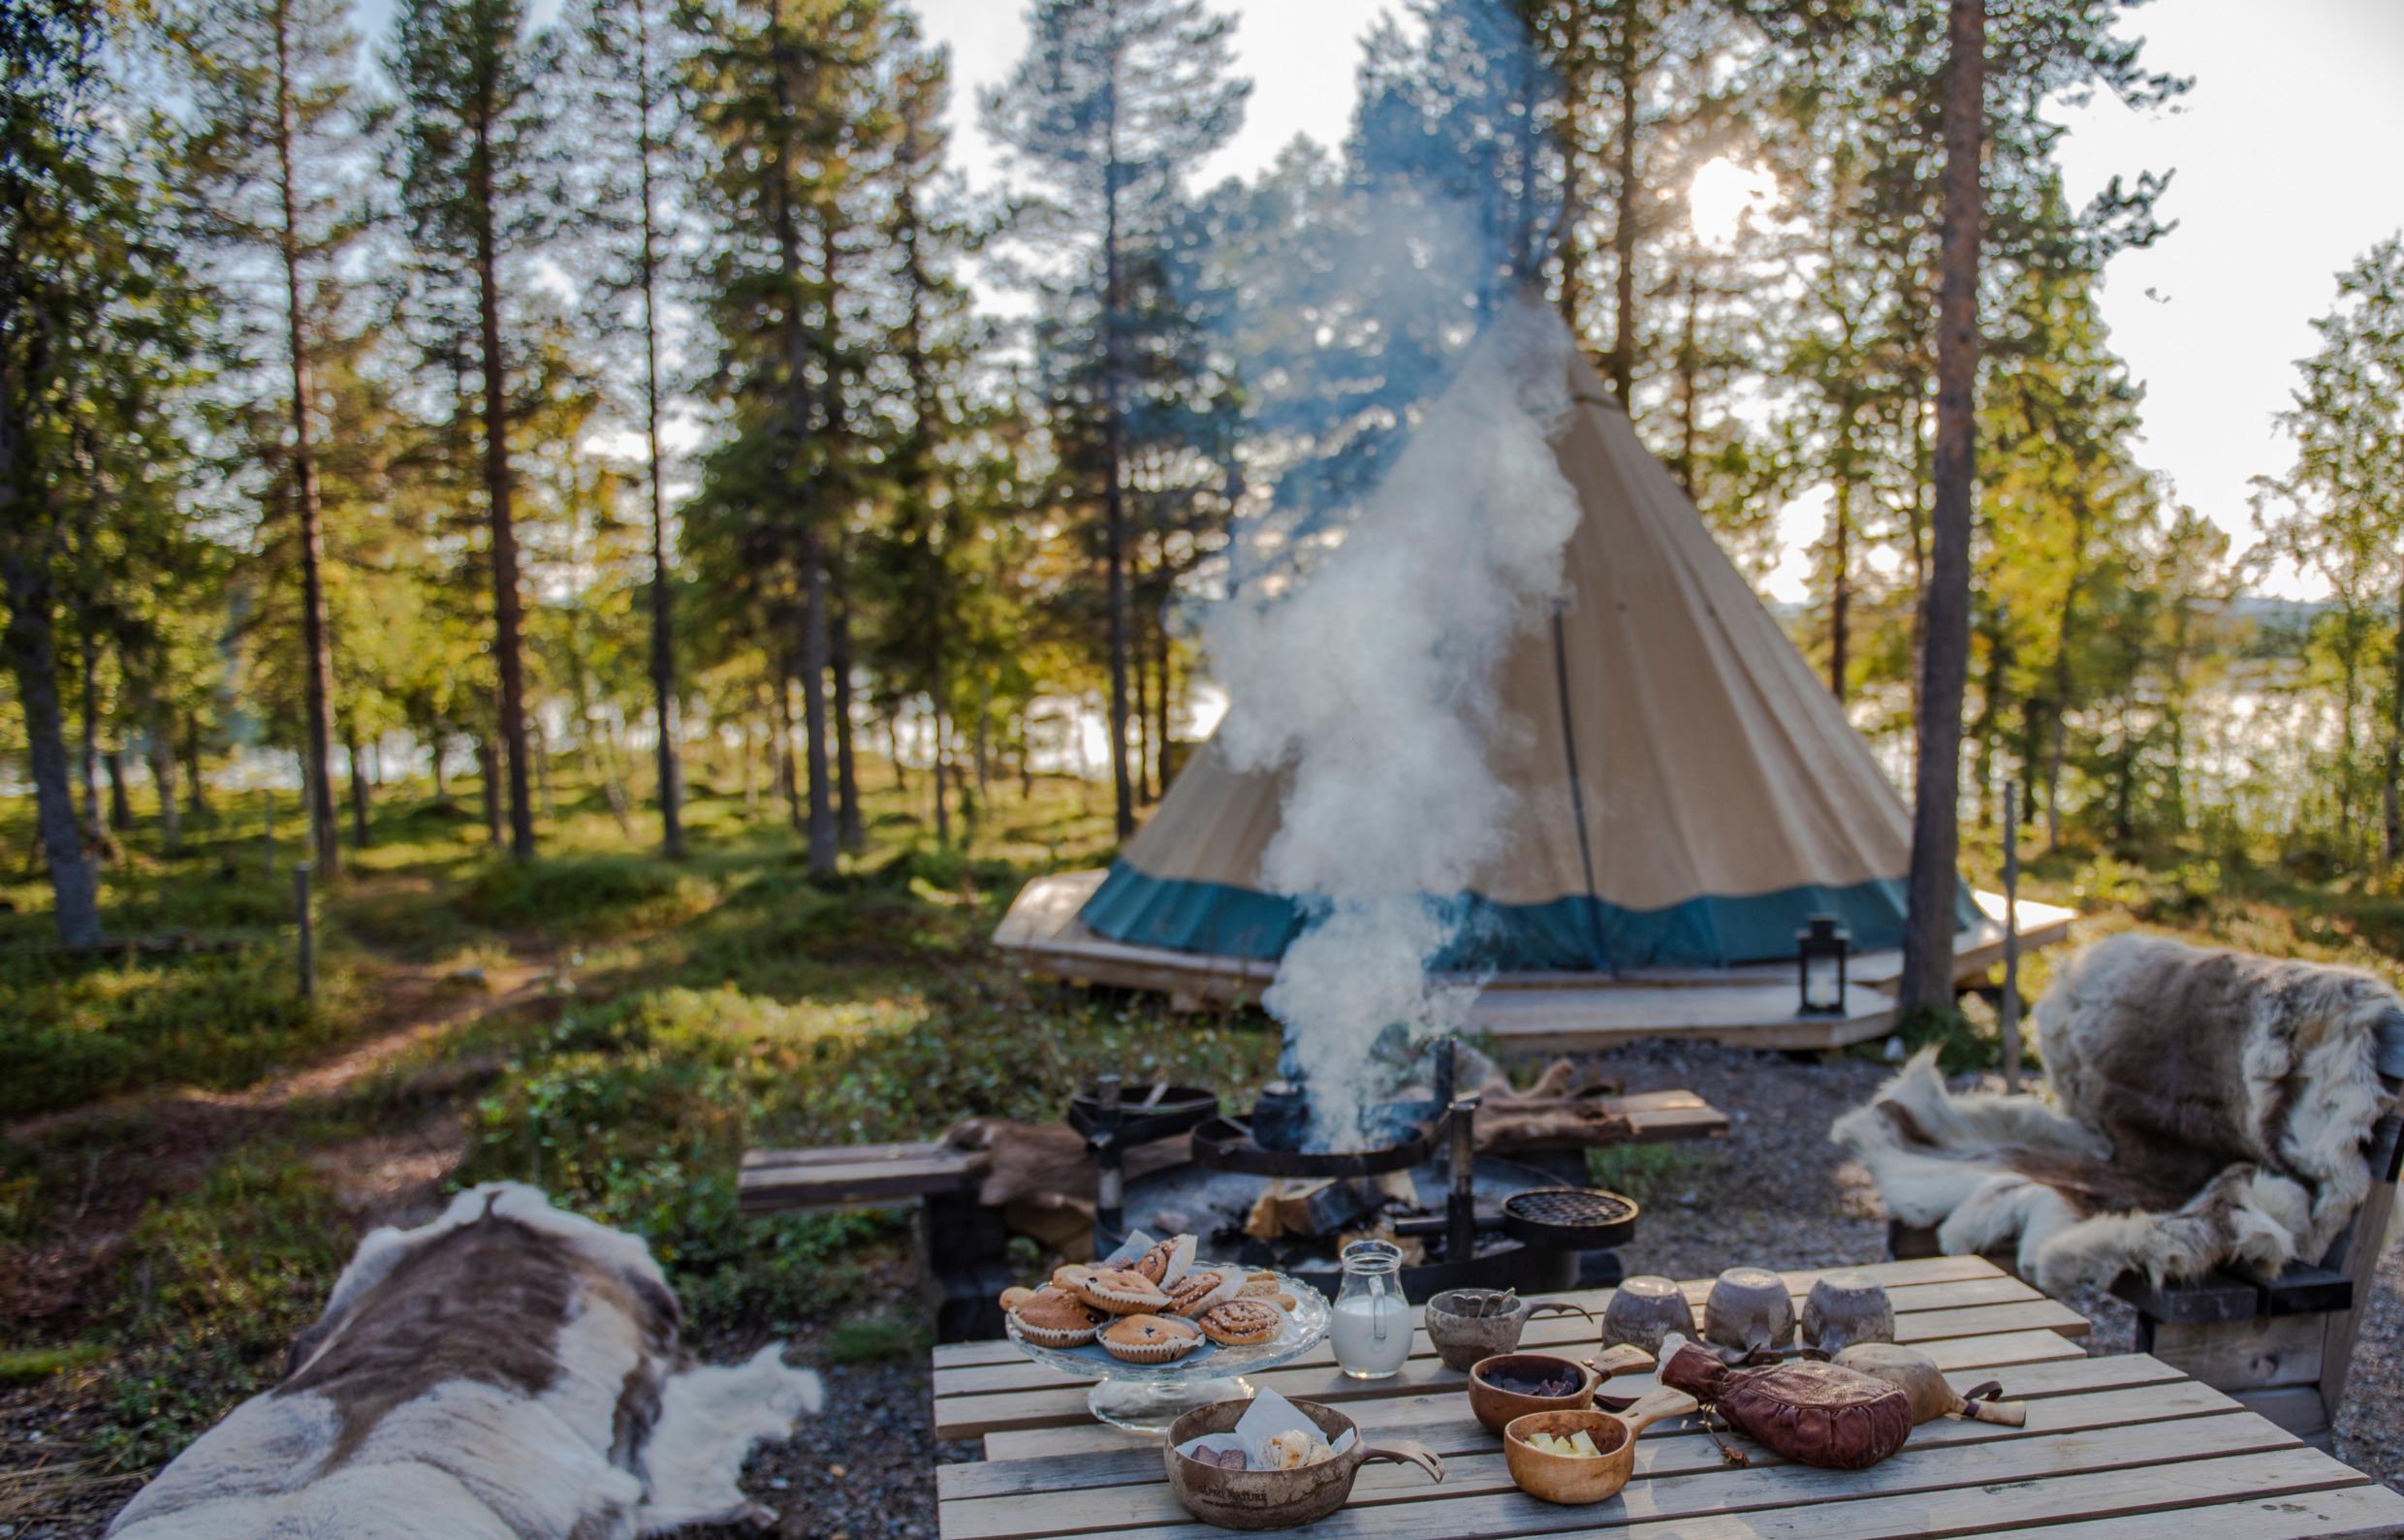 Benches covered in reindeer hides next to a table set with cups and bowls and a plate with buns. A coffee pot is placed over a campfire. A lavvu tent in the background and you get a glimpse of a lake between the trees.